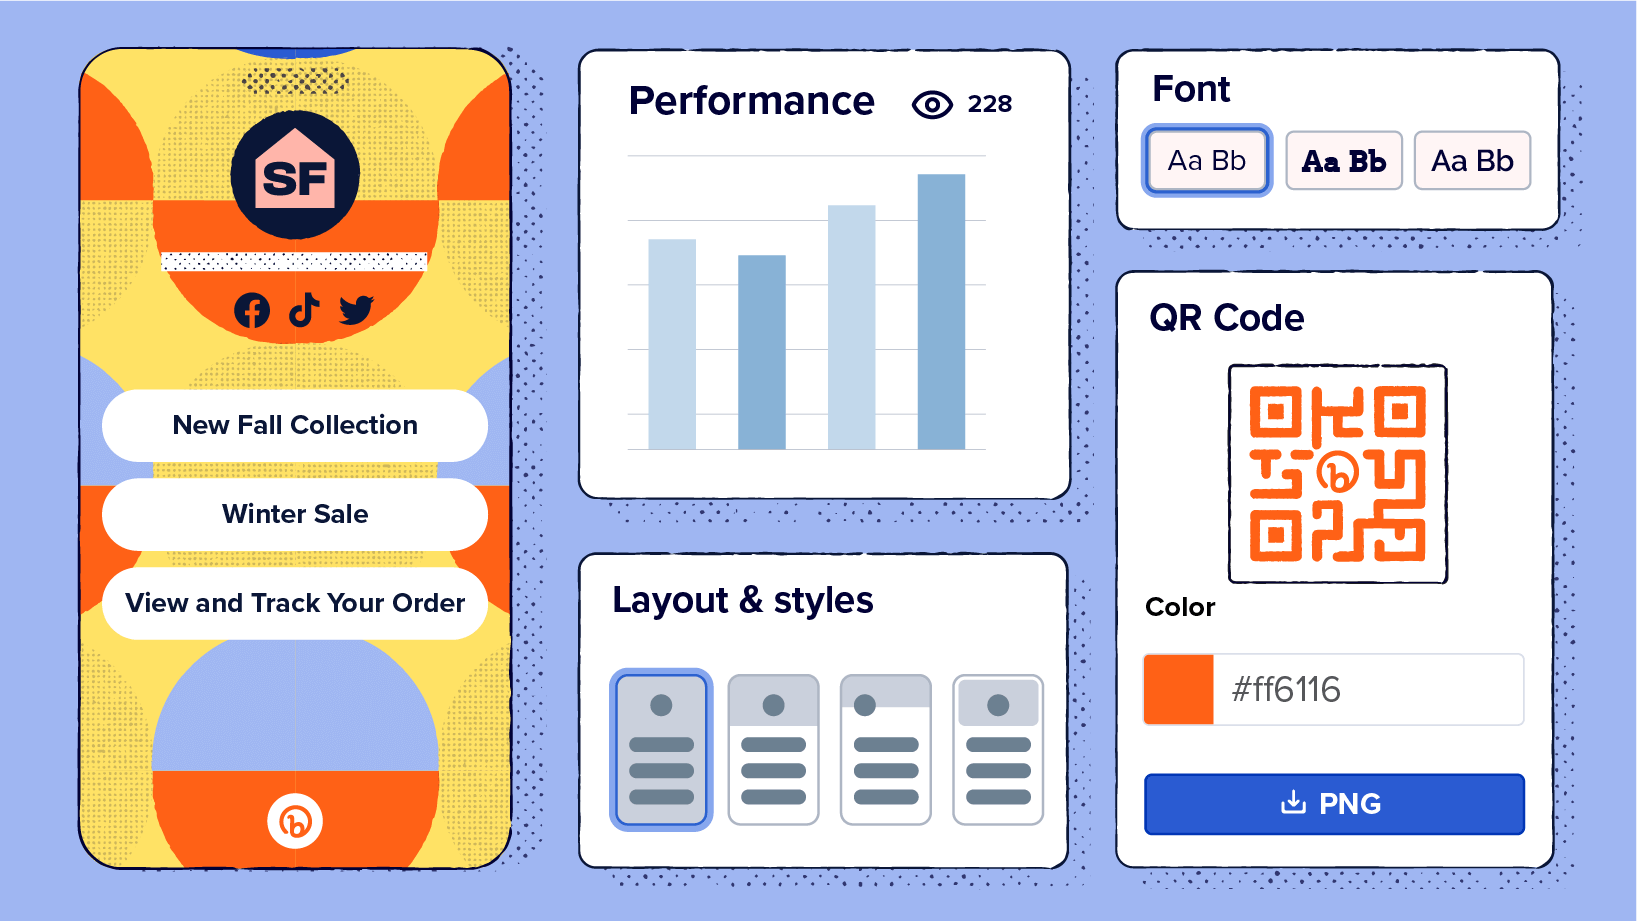 A showcase of Bitly Link-in-bio's capabilities, featuring an example layout, performance metrics, layout and styles options, font options, and QR Code customization.